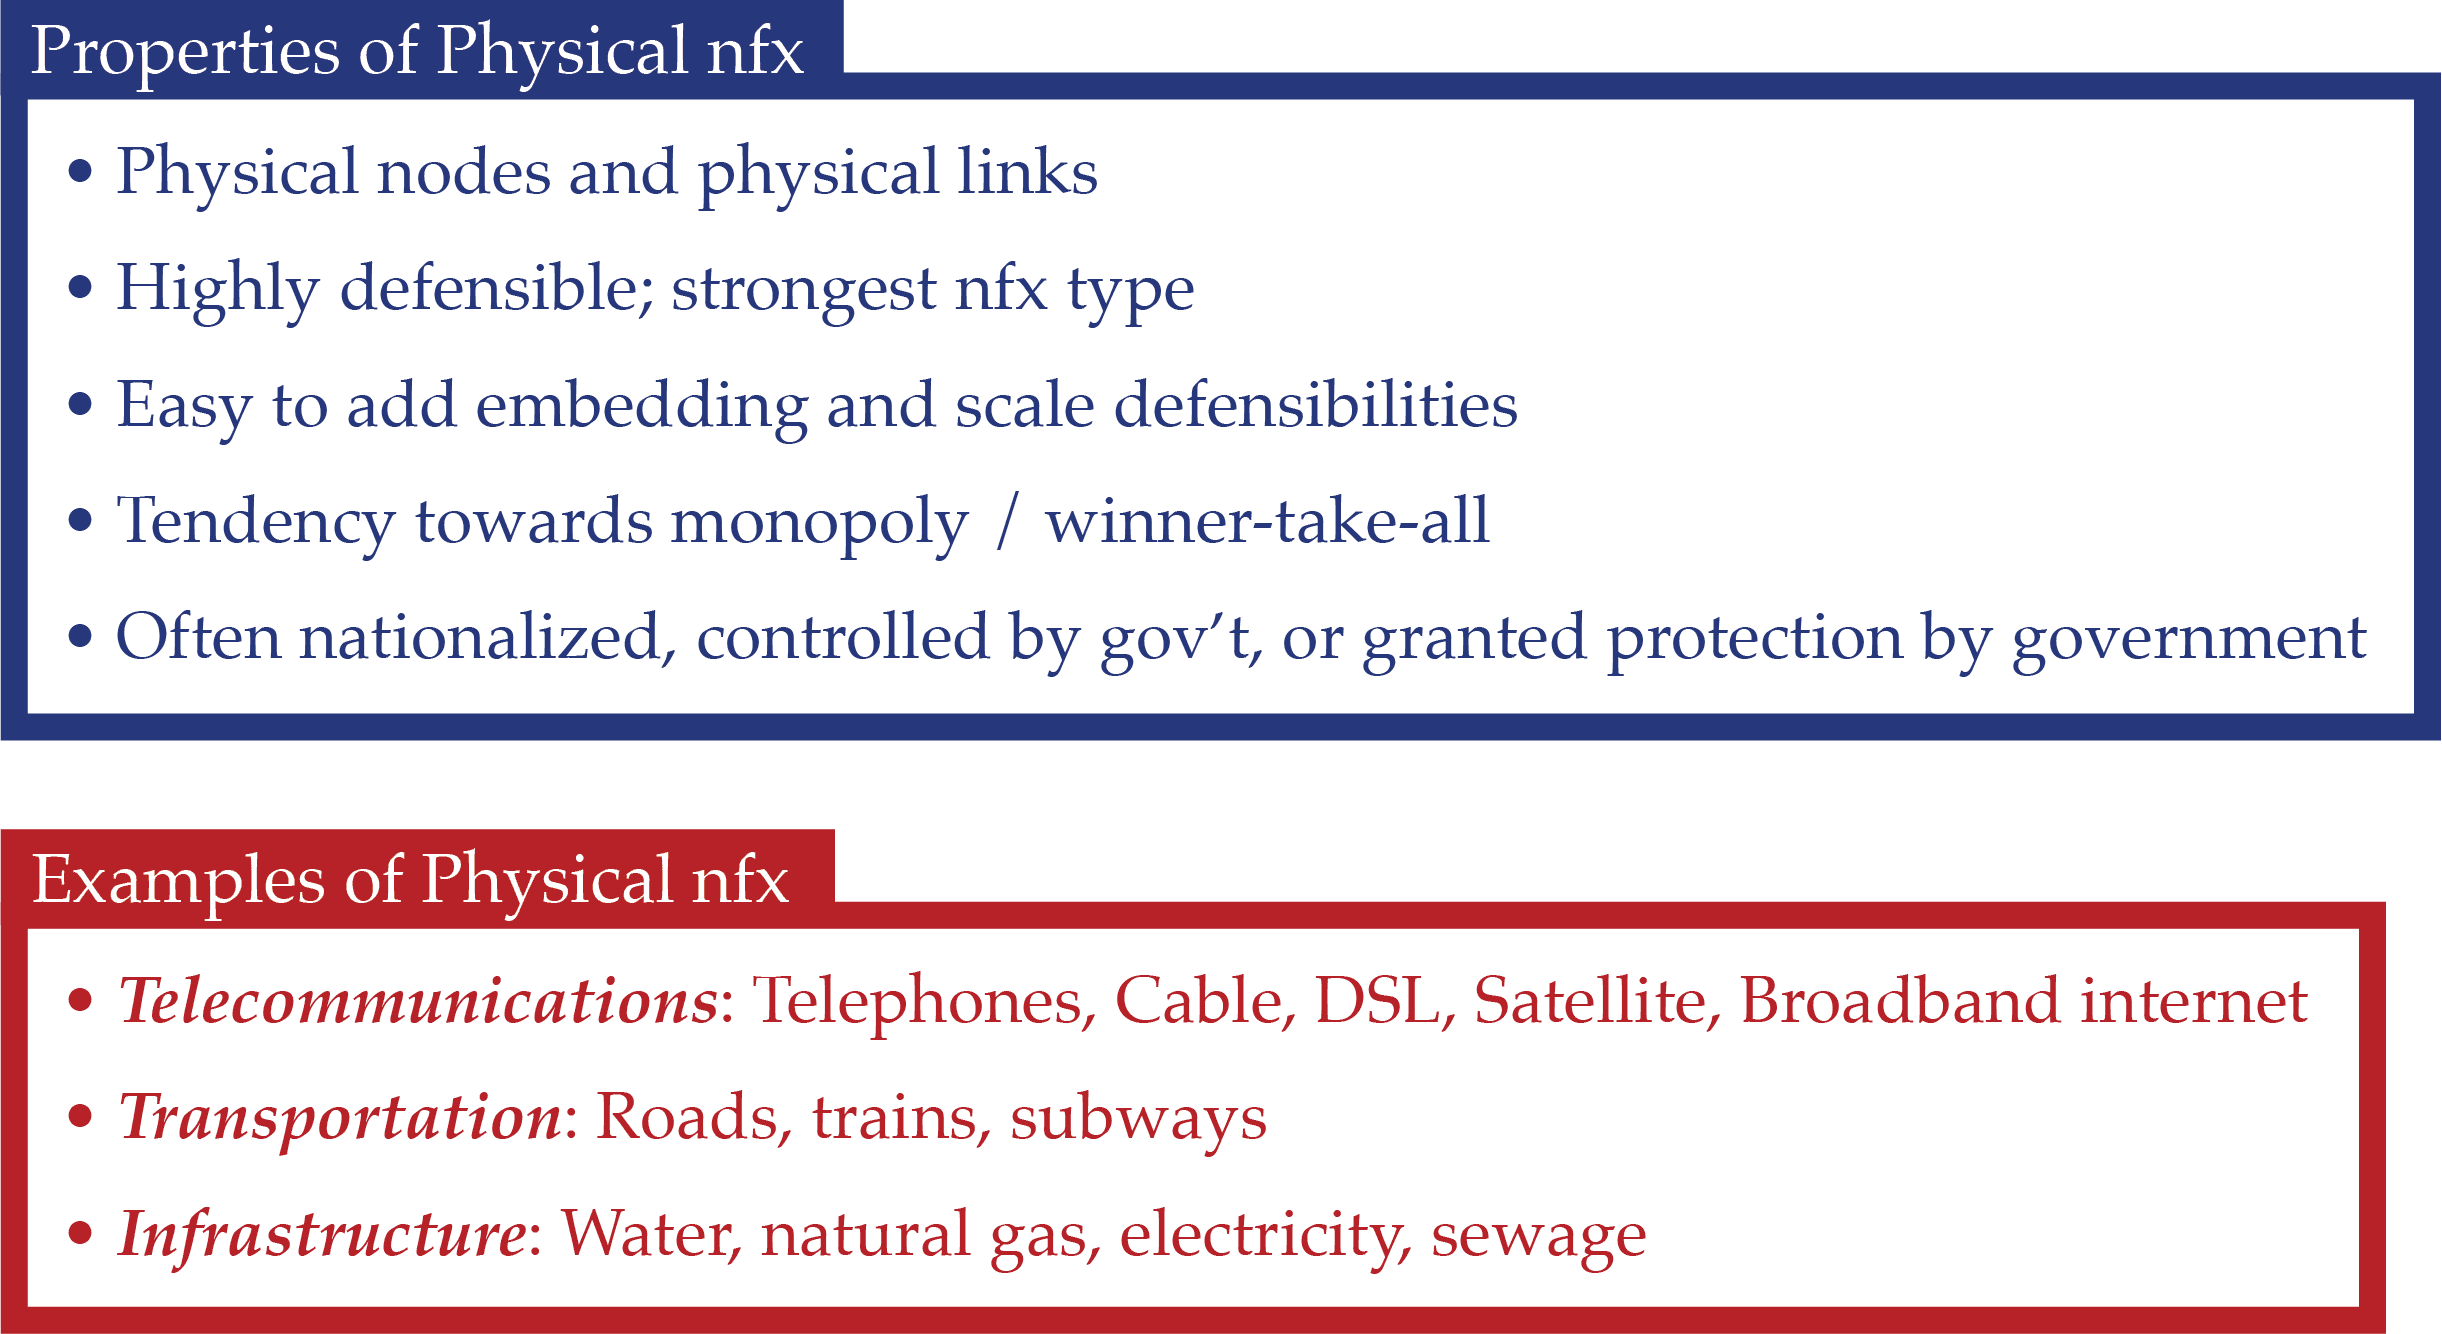 Properties and Example of Physical NFX